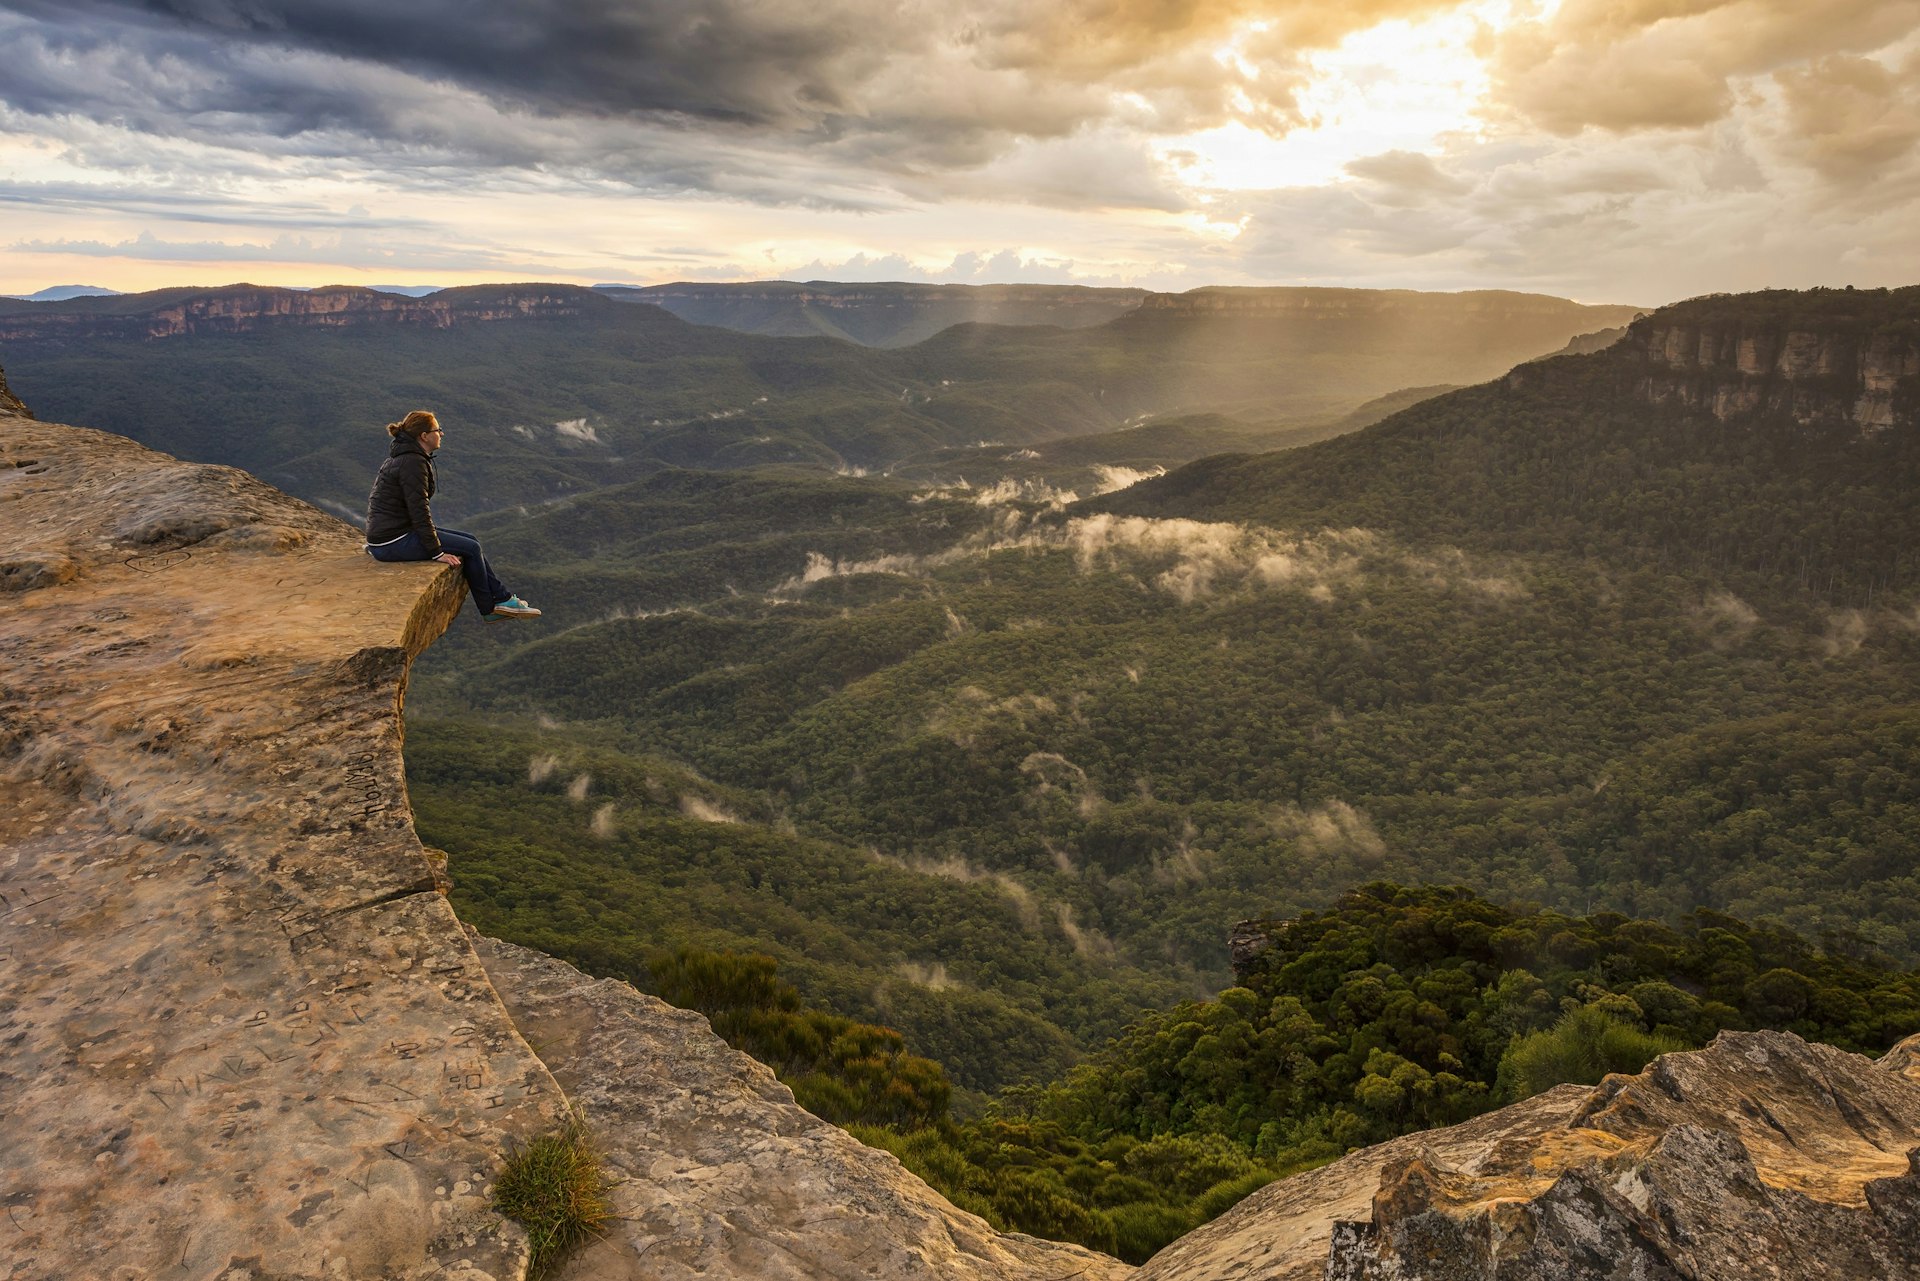 Woman sitting on a rocky ledge overlooking the Blue Mountains National Park during sunset; in the bottom of the valley are fluffy clouds floating over the trees.